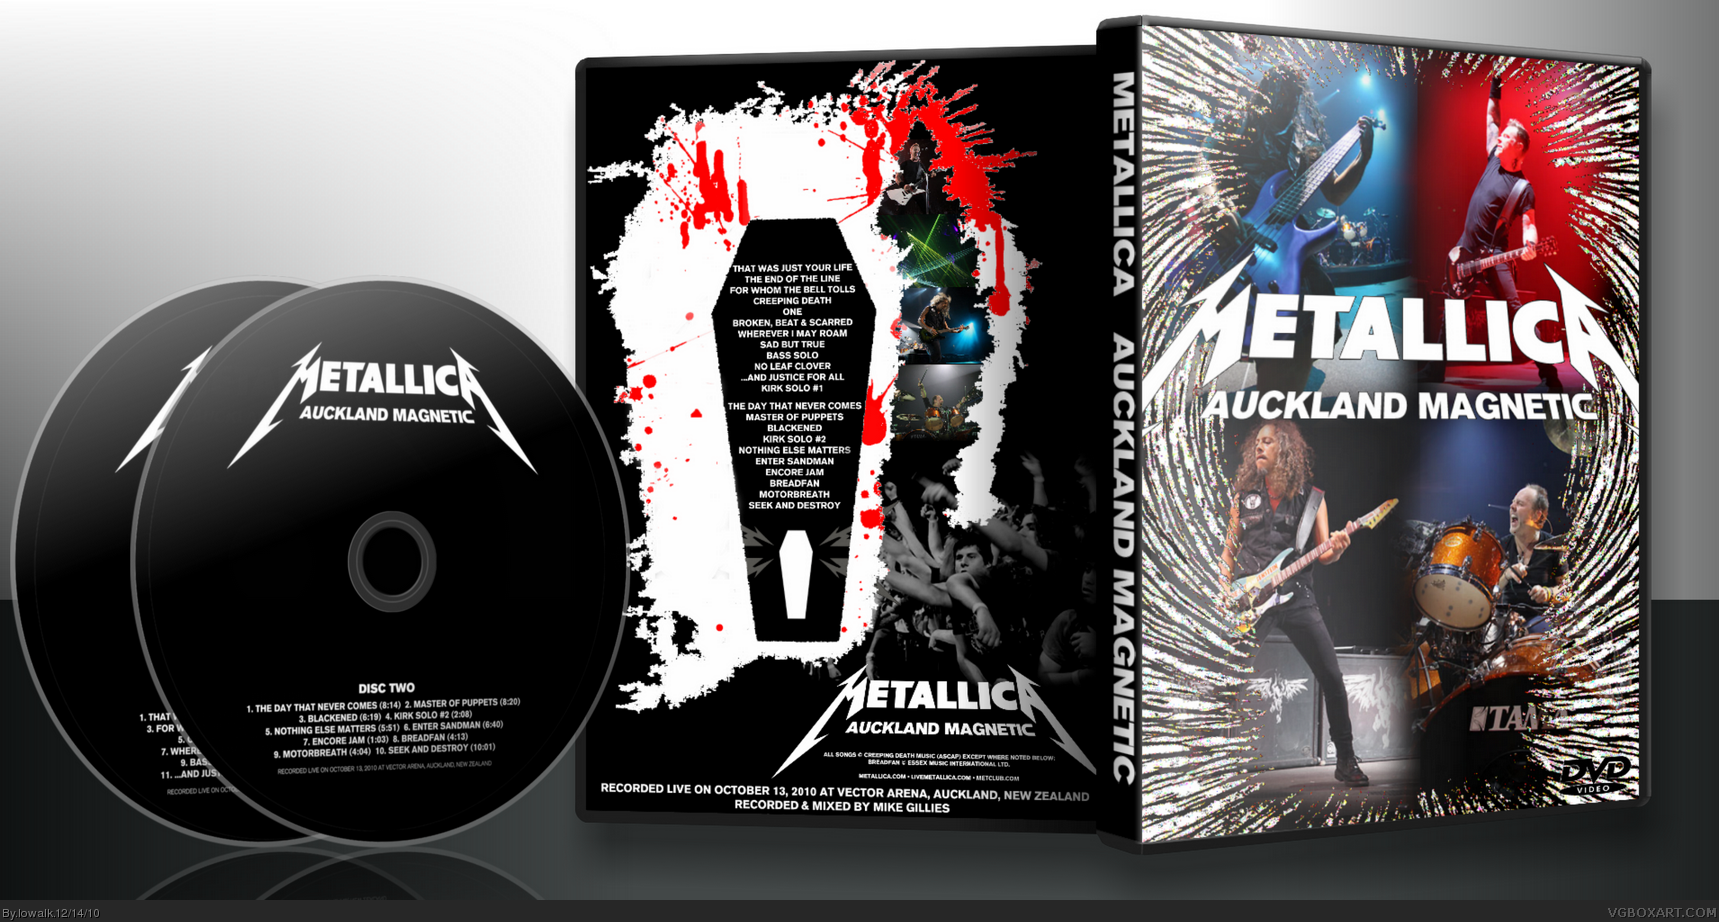 Metallica - Auckland Magnetic LIVE box cover